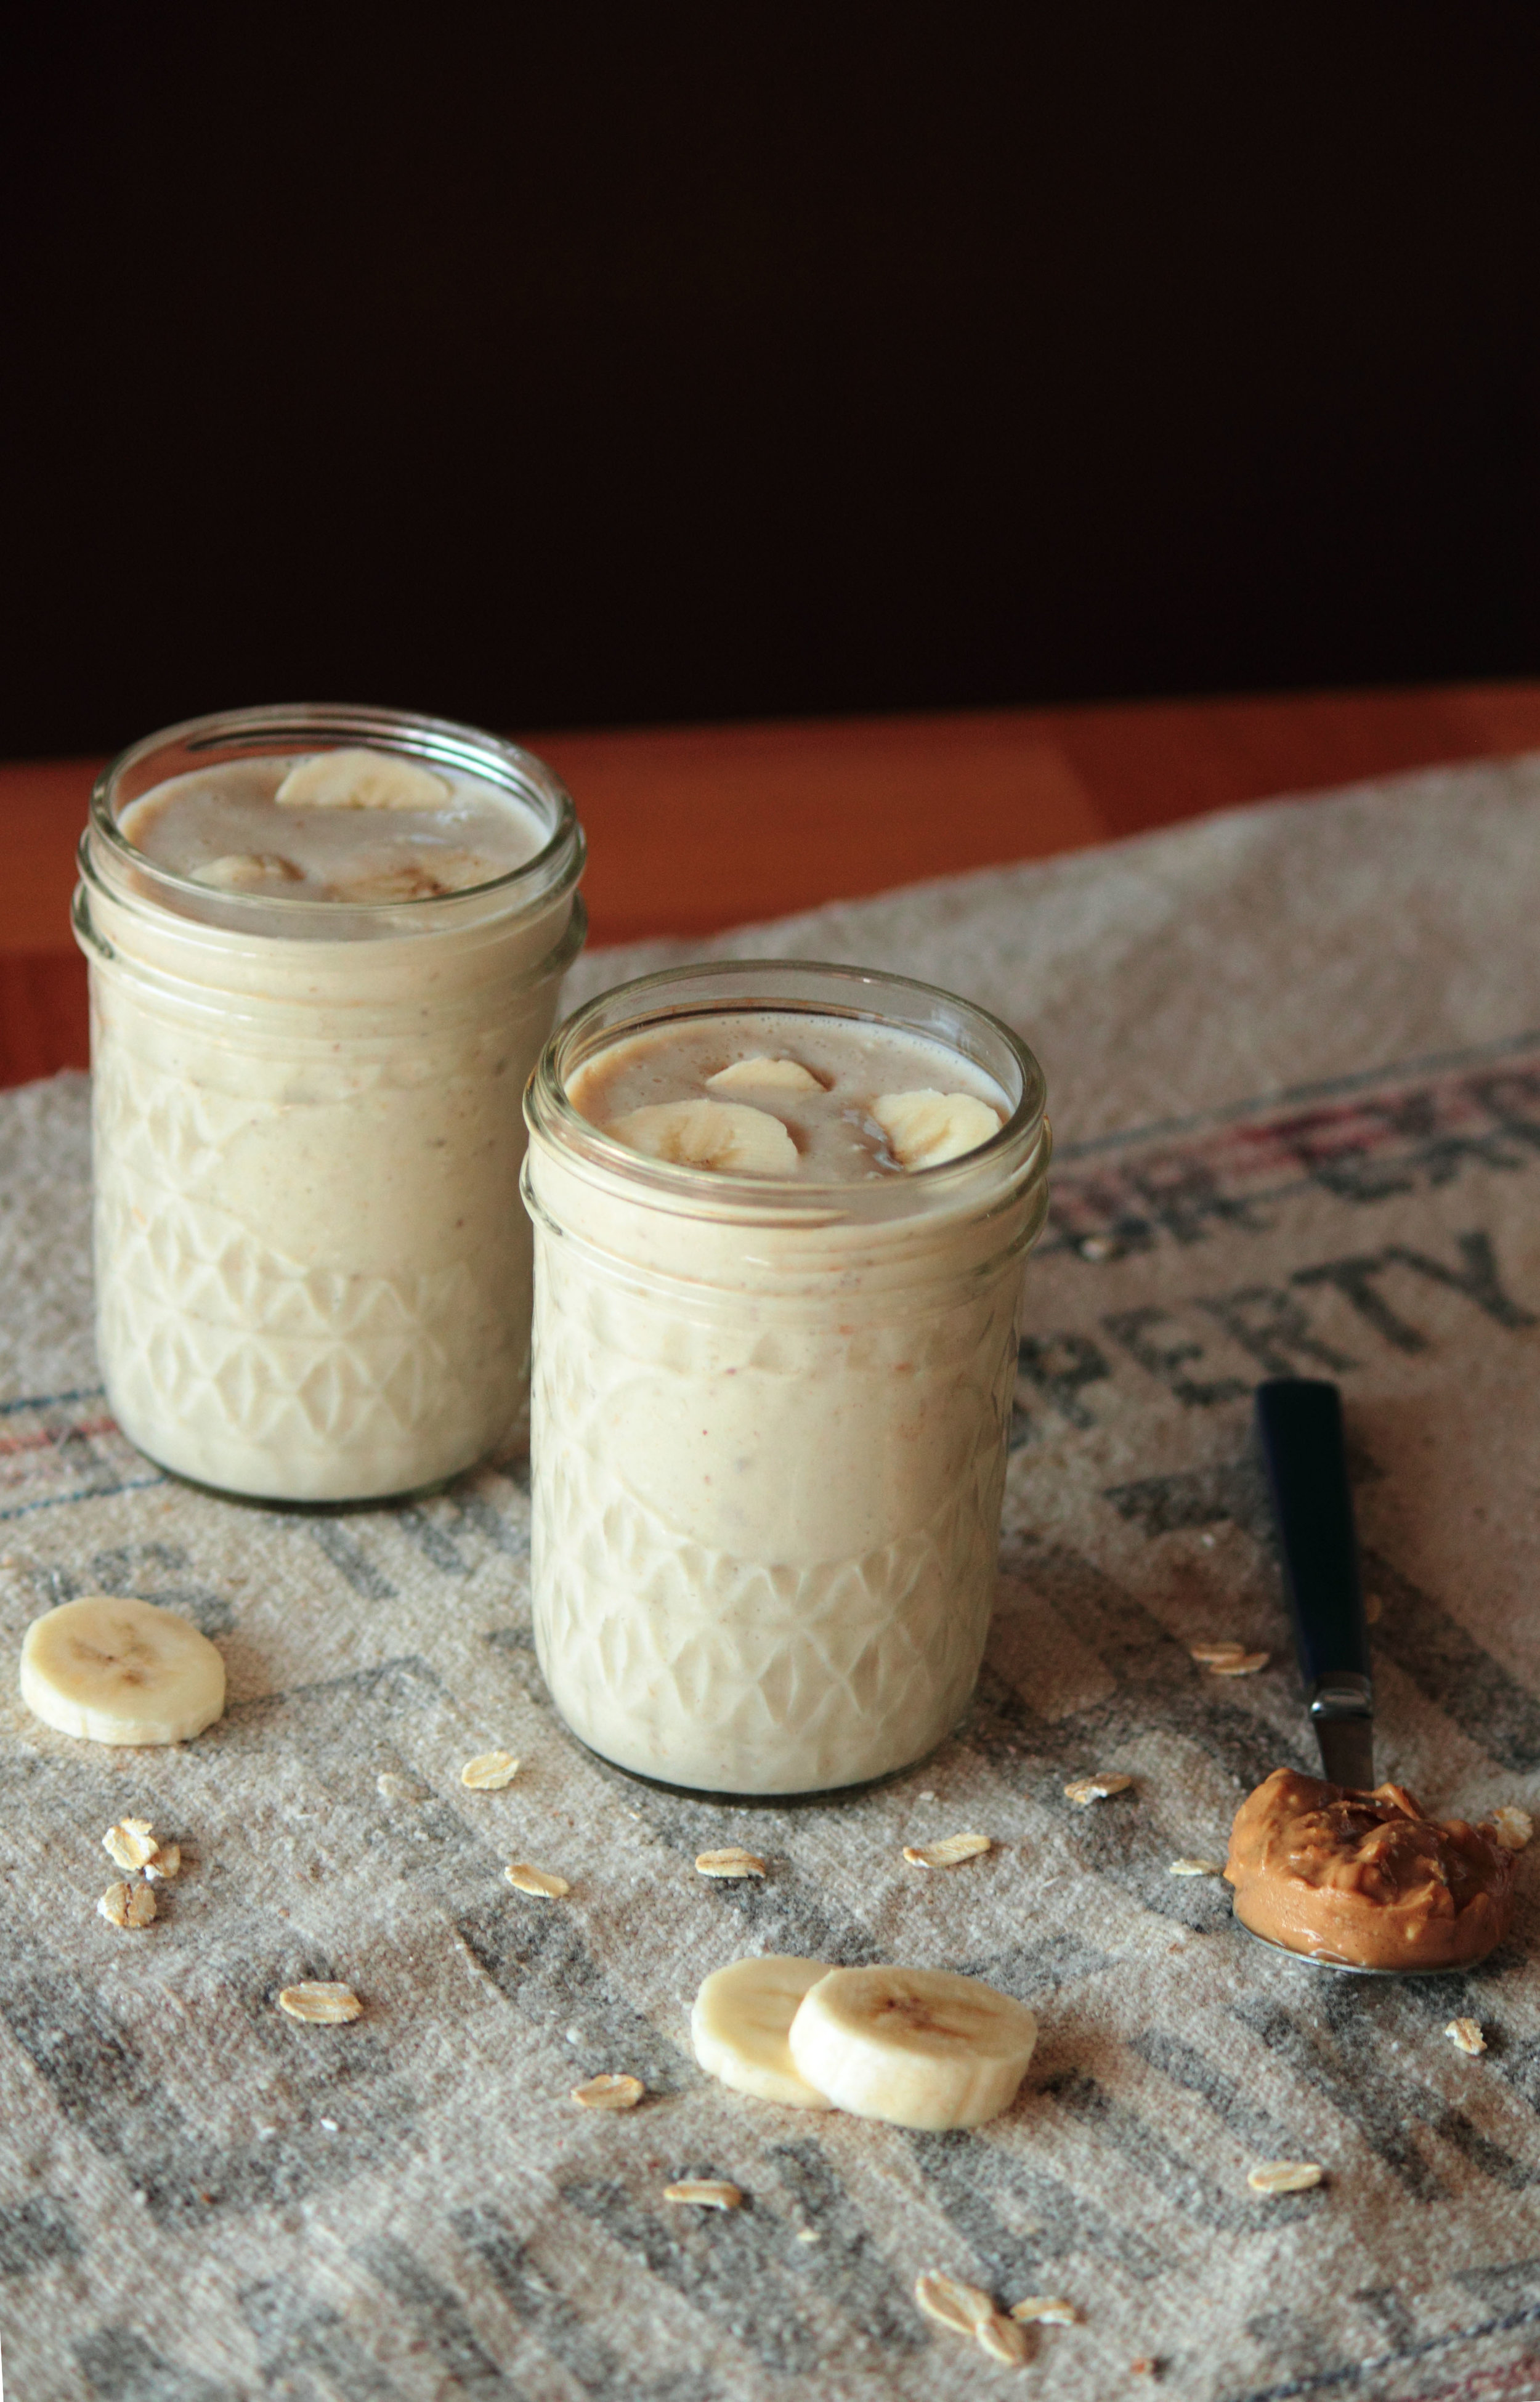 Banana Peanut Butter Protein Smoothie